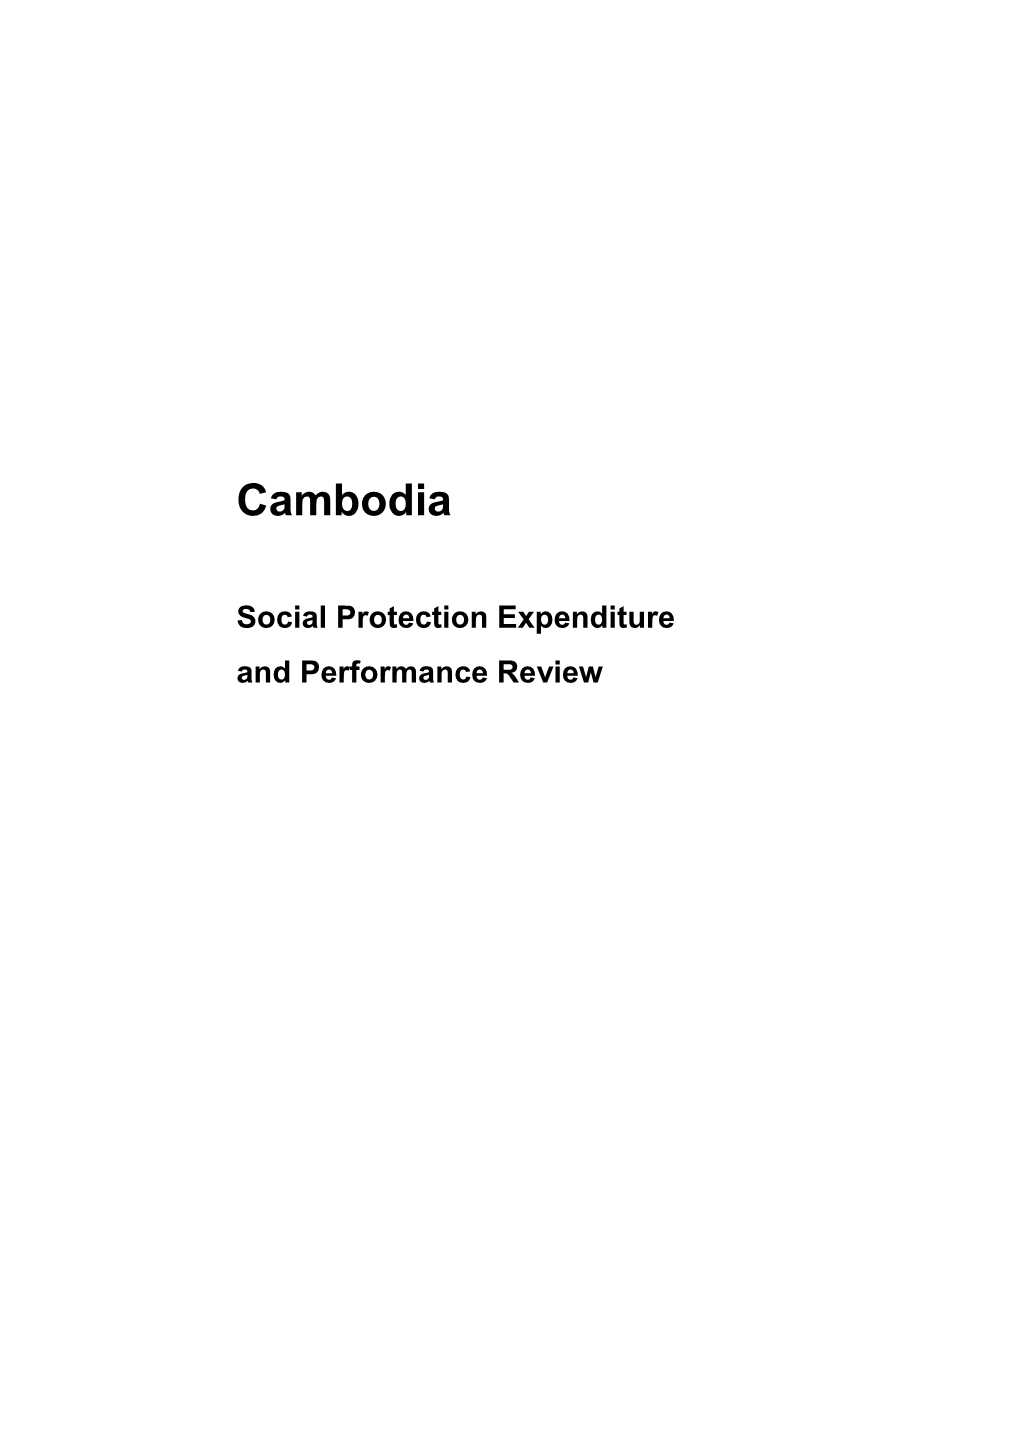 Cambodia. Social Protection Expenditure and Performance